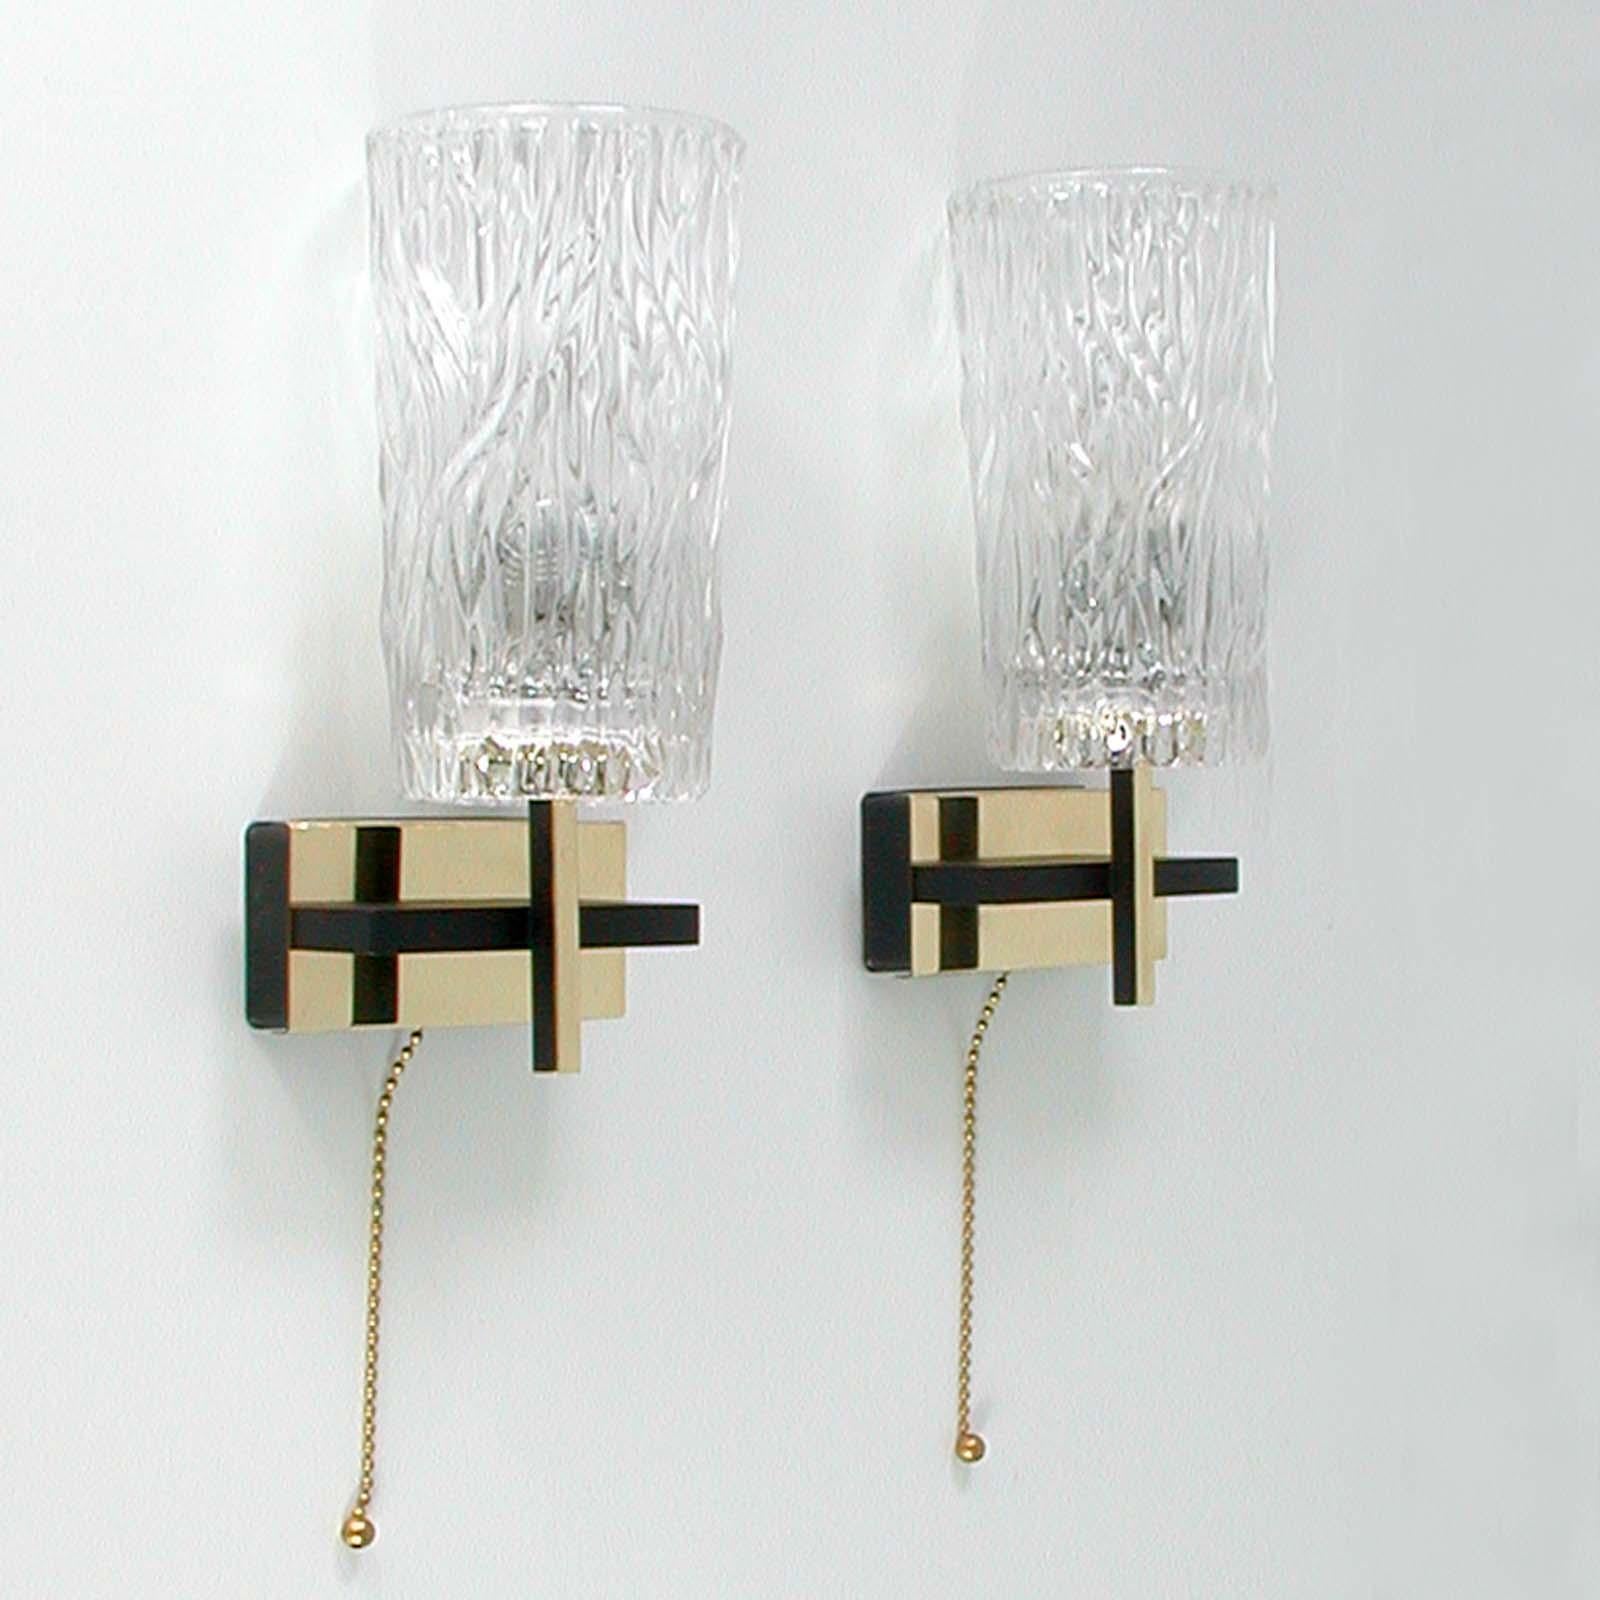 This awesome pair of French sconces was produced by Maison Arlus in the 1950s. The lights are made of brass, black lacquered metal and have got thick textured glass lamp shades. 

The lights require a E14 bulb each. They have been polished and are